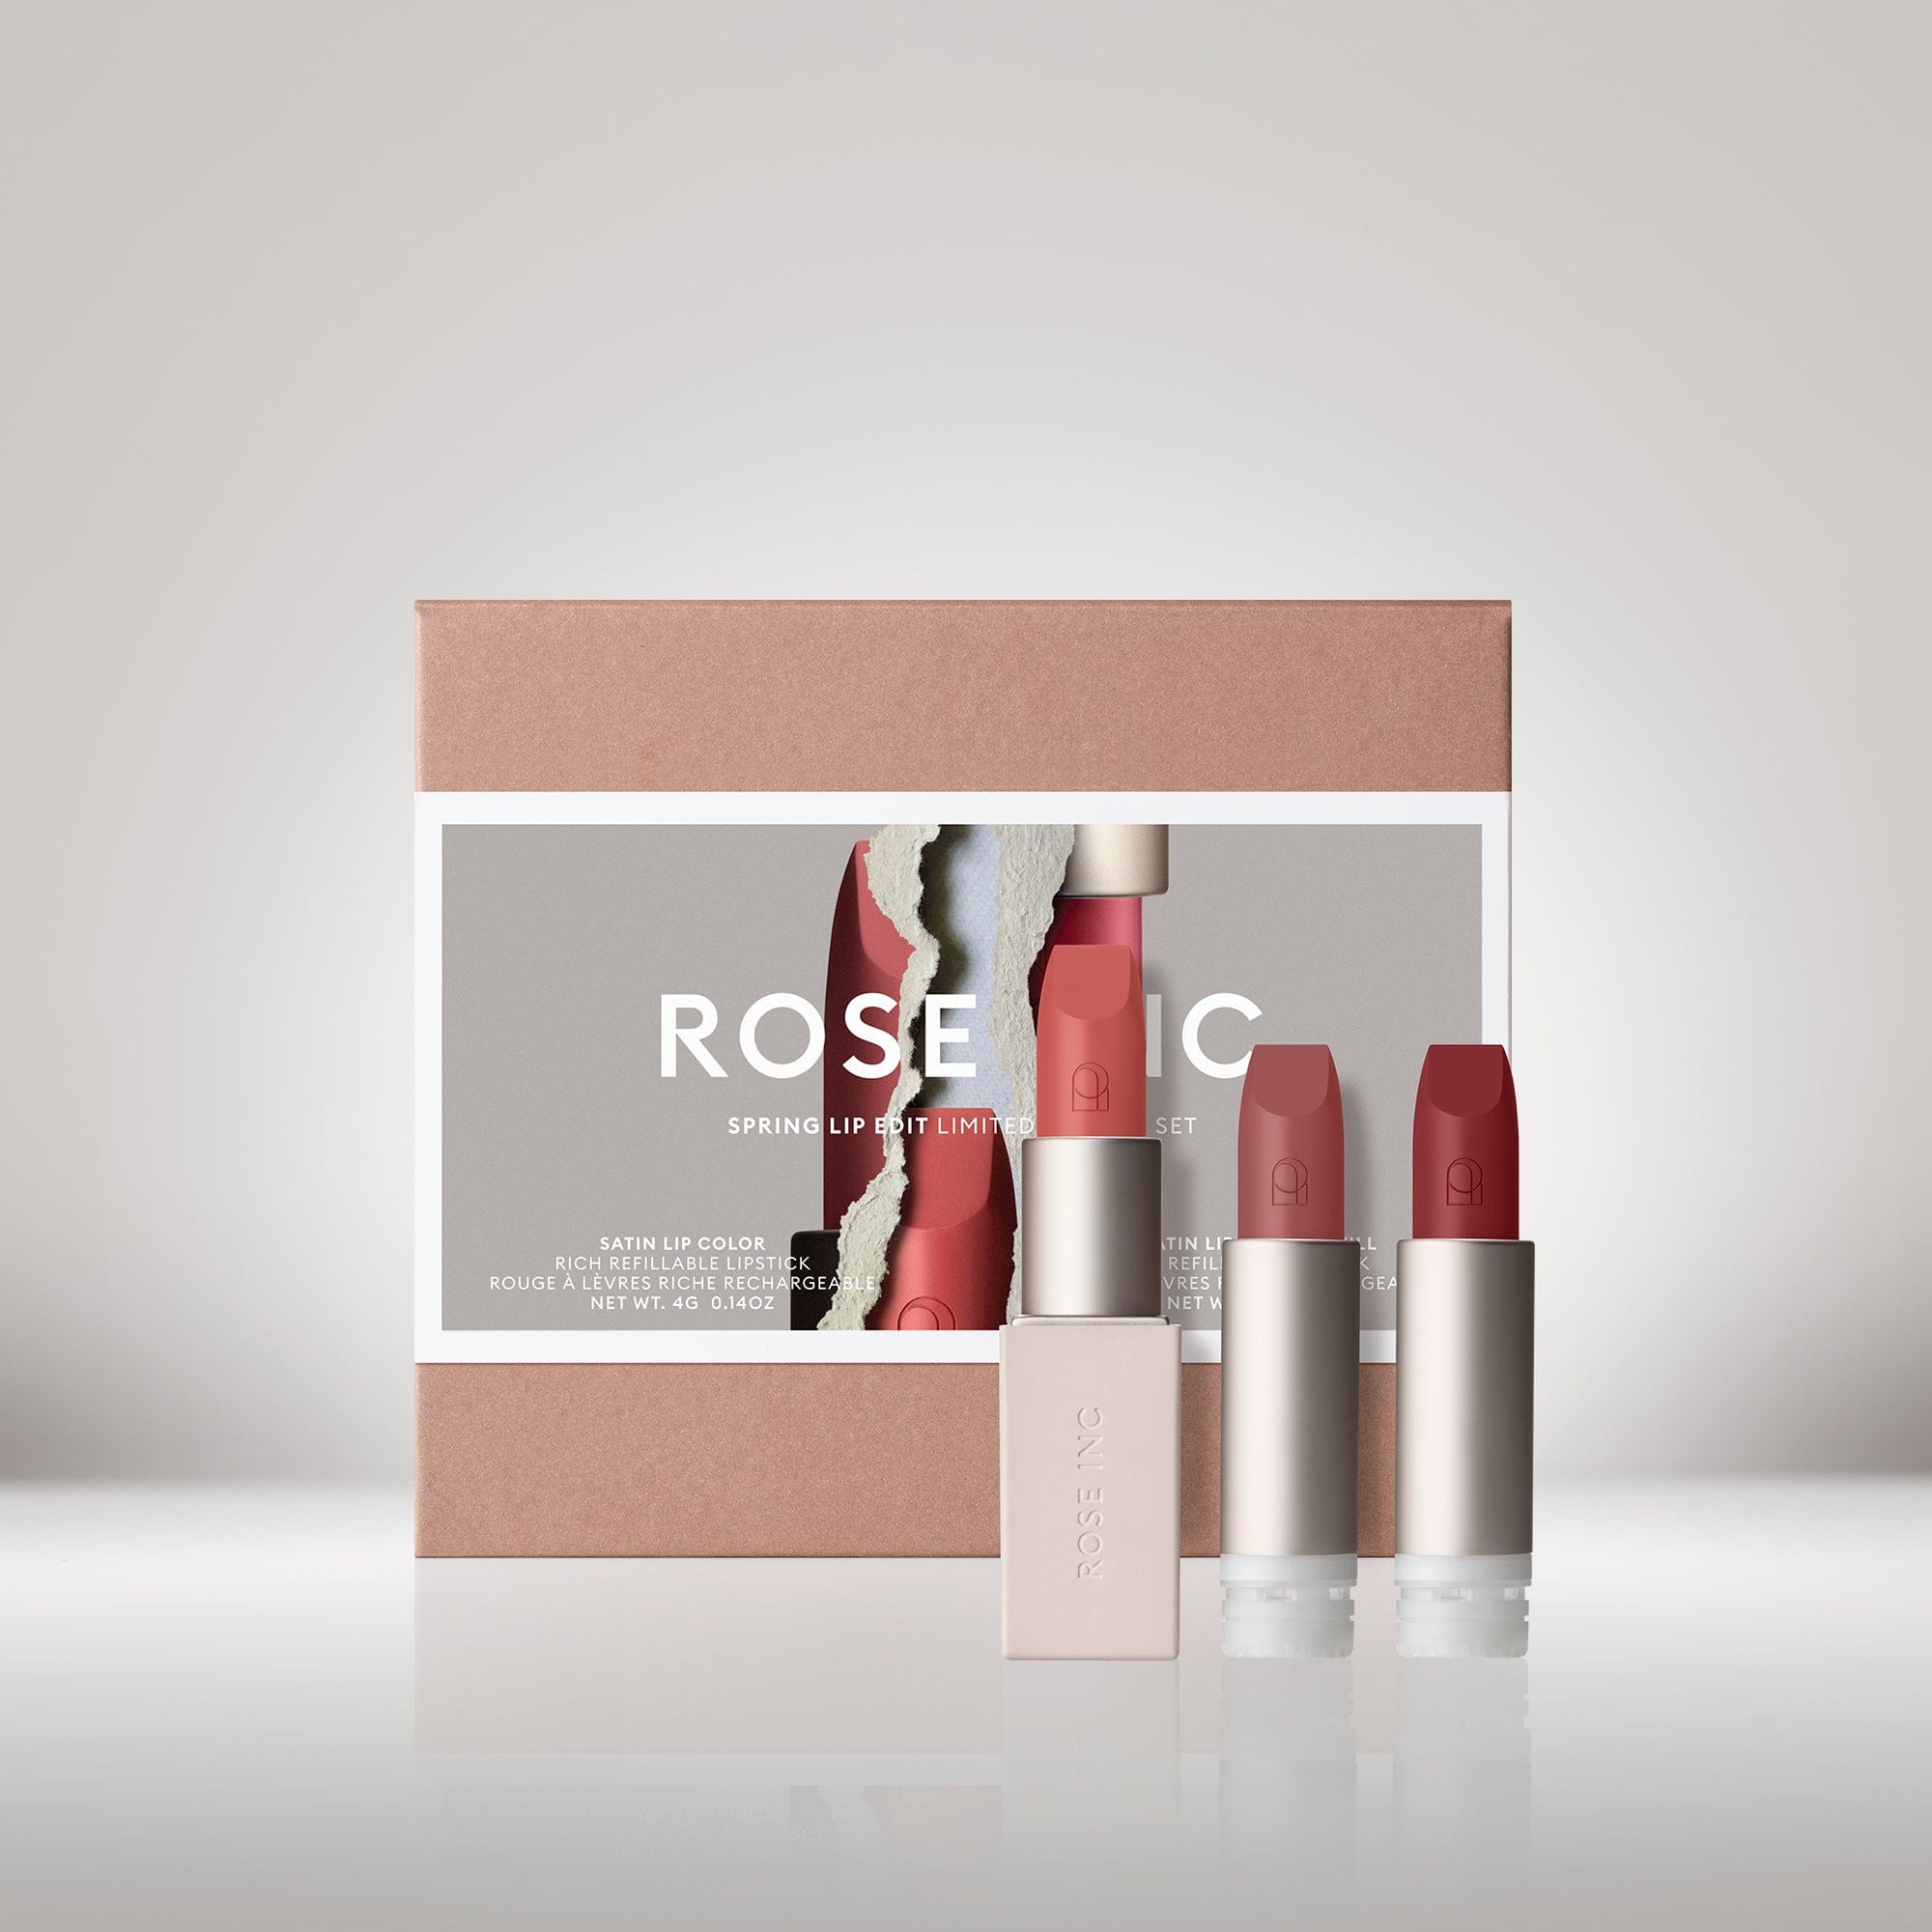 Rose Inc exclusive value set featuring 3 shades of the Satin Lipstick, one full-size and two refills, in a custom Rose Inc gift box